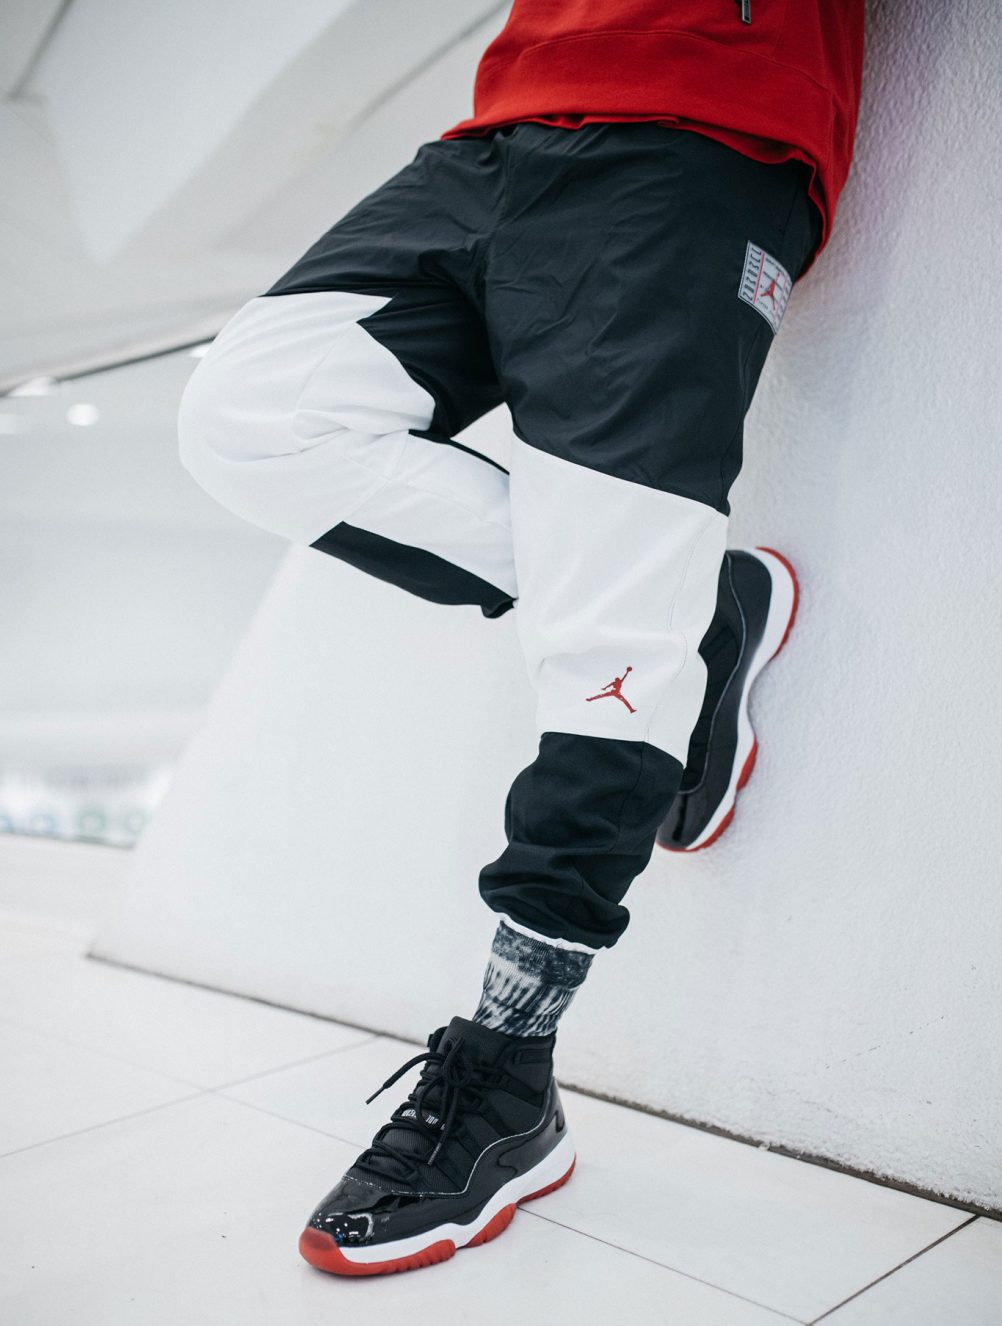 What to Wear With the Air Jordan 11 Bred | SneakerFits.com